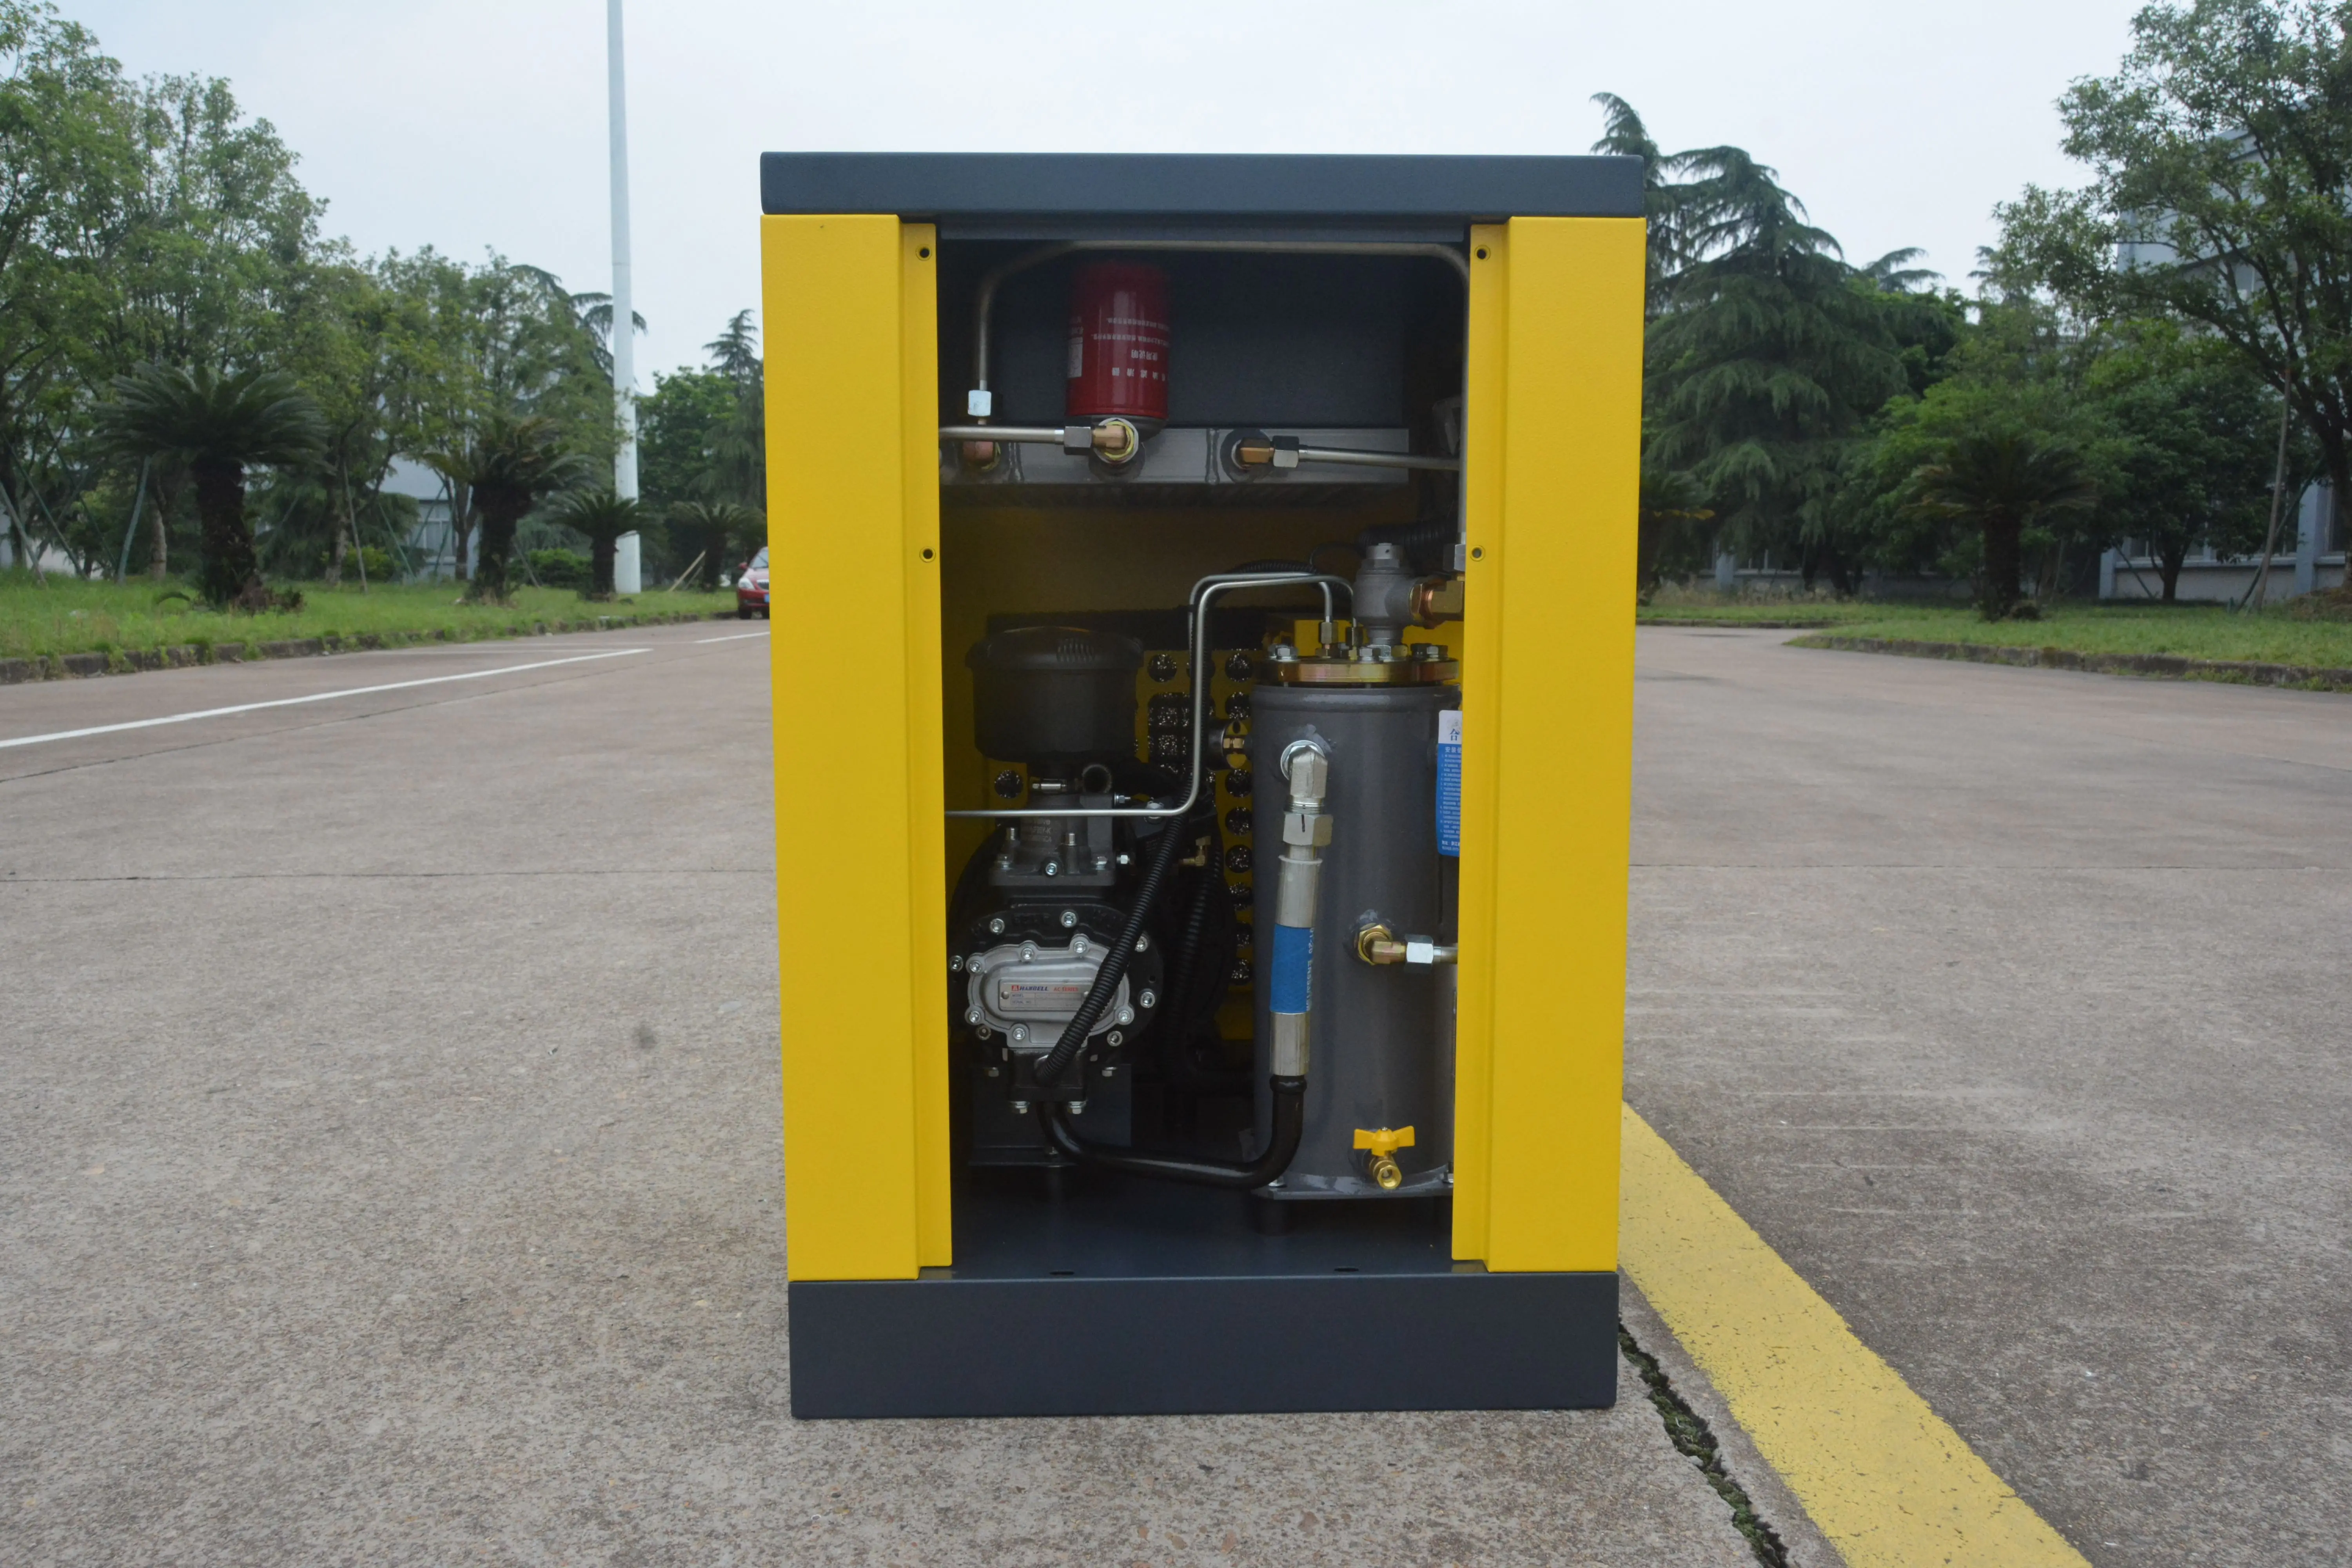 China's Outstanding 7.5Kw 10Hp Small Silent Rotary Screw Air Compressor Low Pressure Oil-Free Industrial Use Sale Price